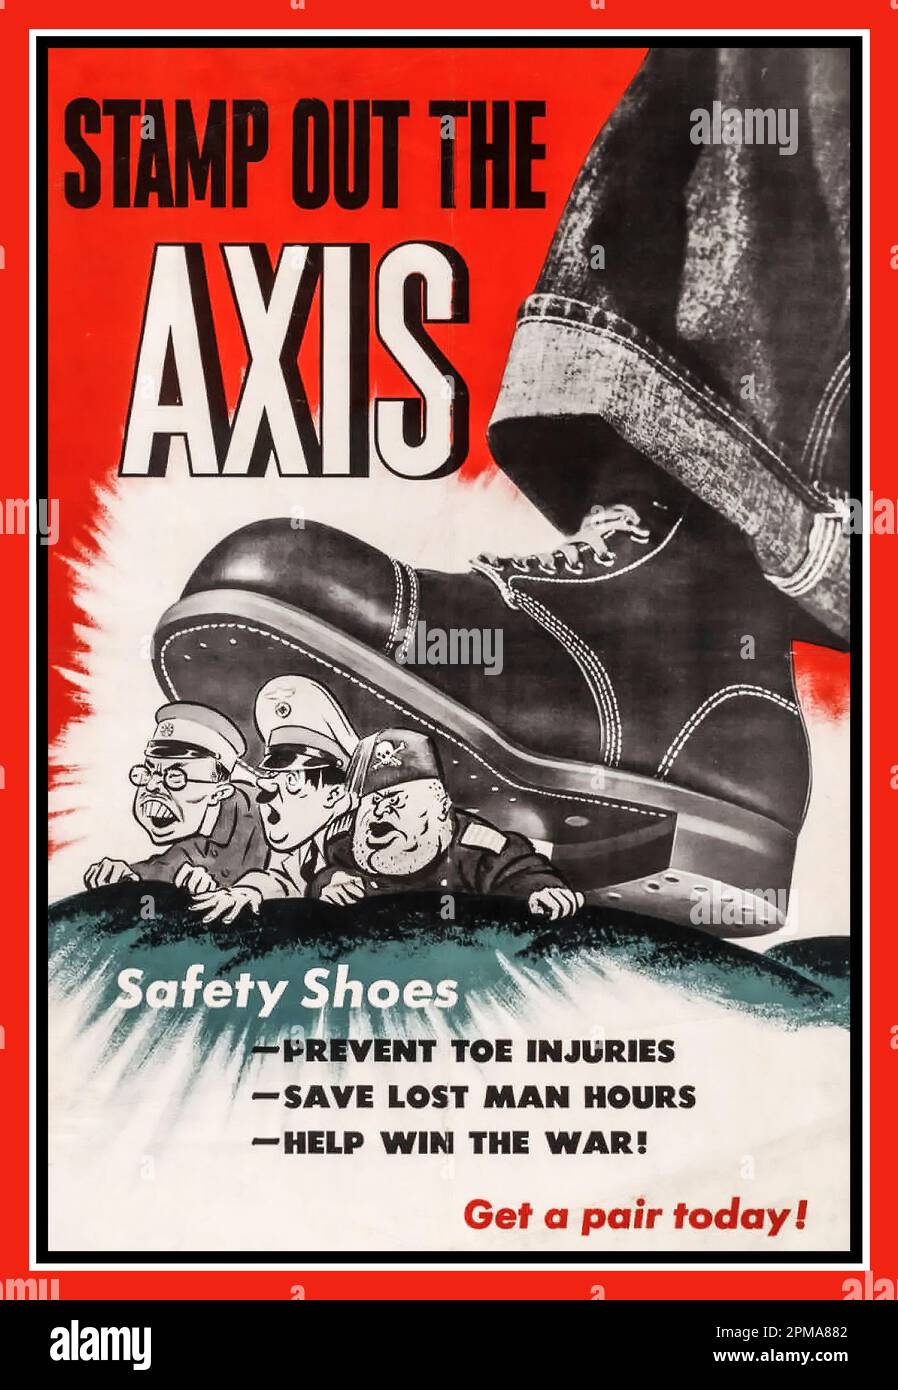 WW2 Propaganda Poster ''Stamp Out The Axis' safety shoes campaign featuring the Axis members Emperor Hirohito Imperial Japan, Adolf Hitler Nazi Germany and Benito Mussolini Facist Italy, to prevent lost man hours on war work etc 1940s World War II Second World War  Emperor Hirohito Imperial Japan, Adolf Hitler Nazi Germany and Benito Mussolini Facist Italy Stock Photo